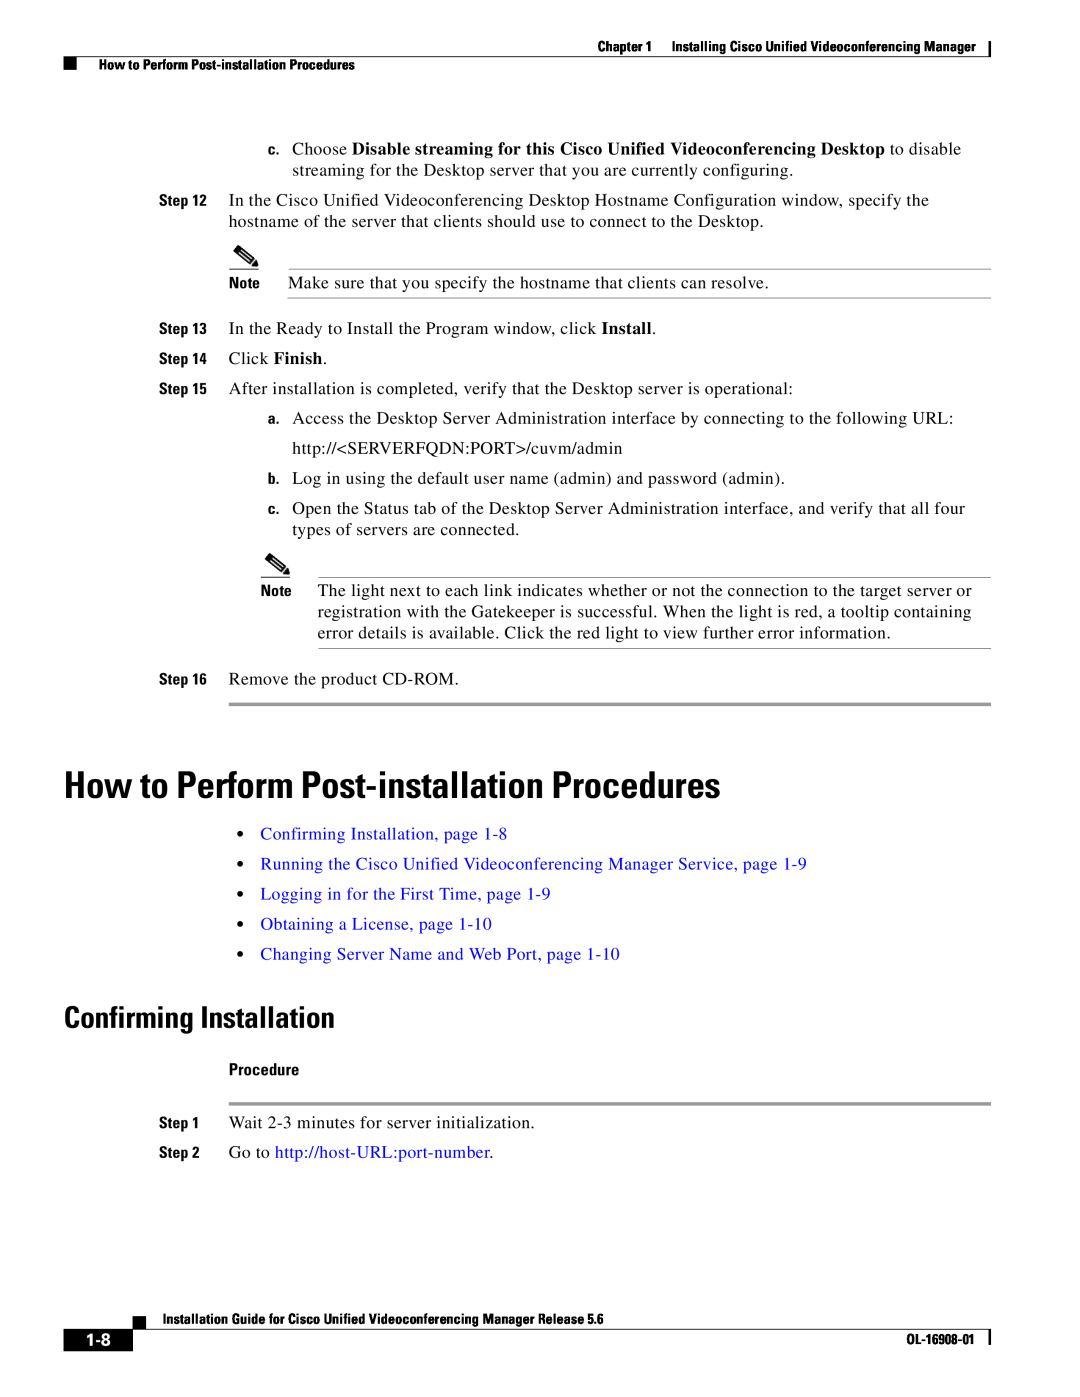 Cisco Systems Unified Videoconferencing Manager manual How to Perform Post-installation Procedures, Confirming Installation 